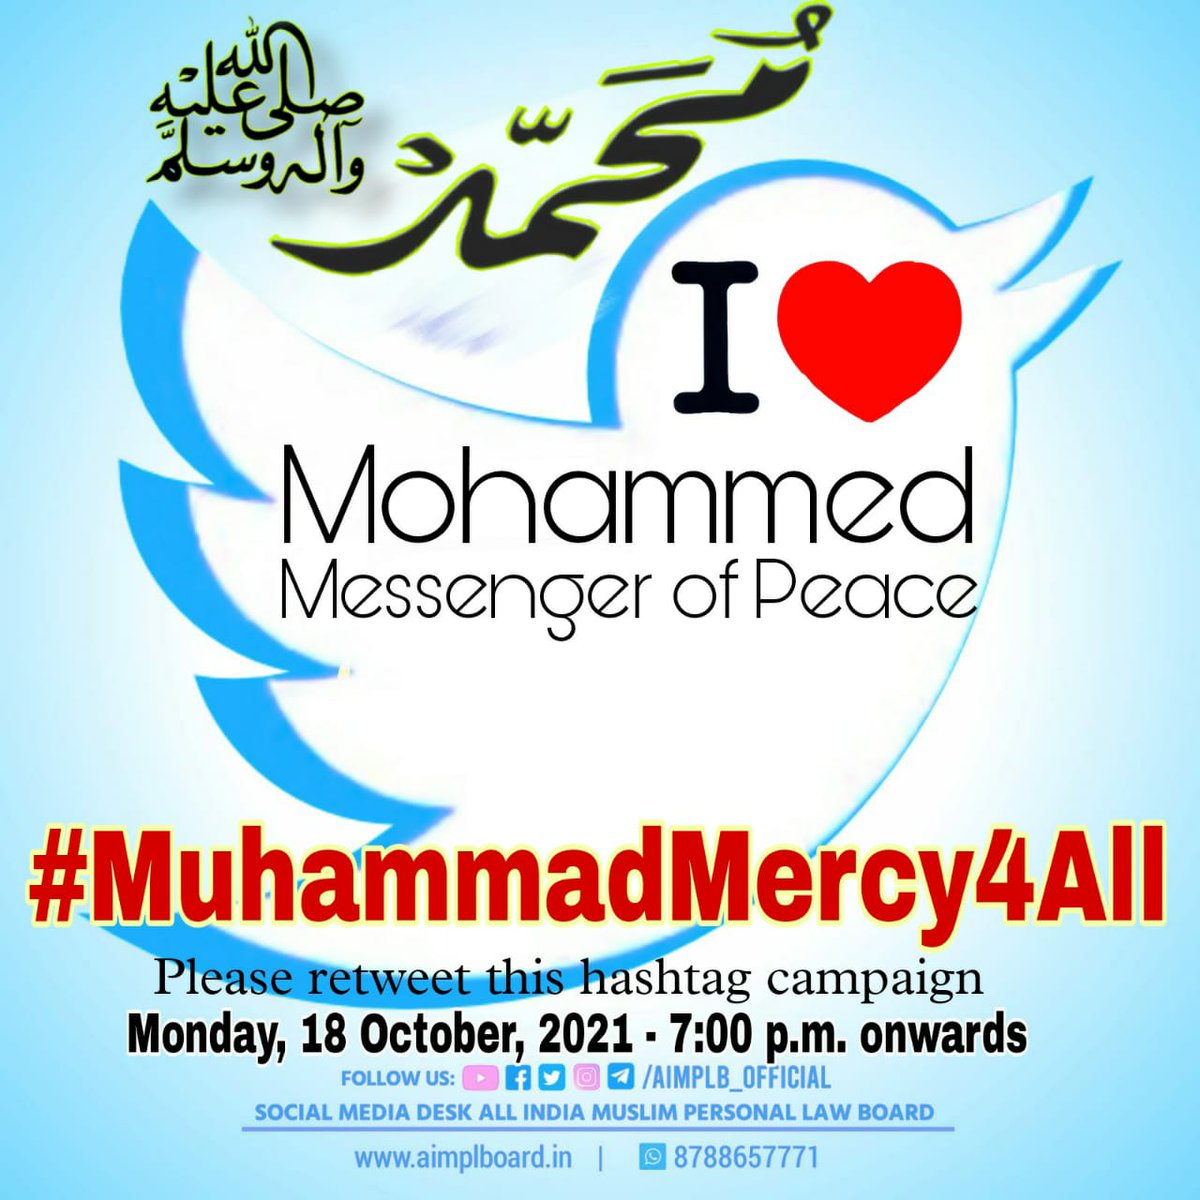 Please participate in this trend using hashtag #MuhammadMercy4All at 7:00 pm onwards.